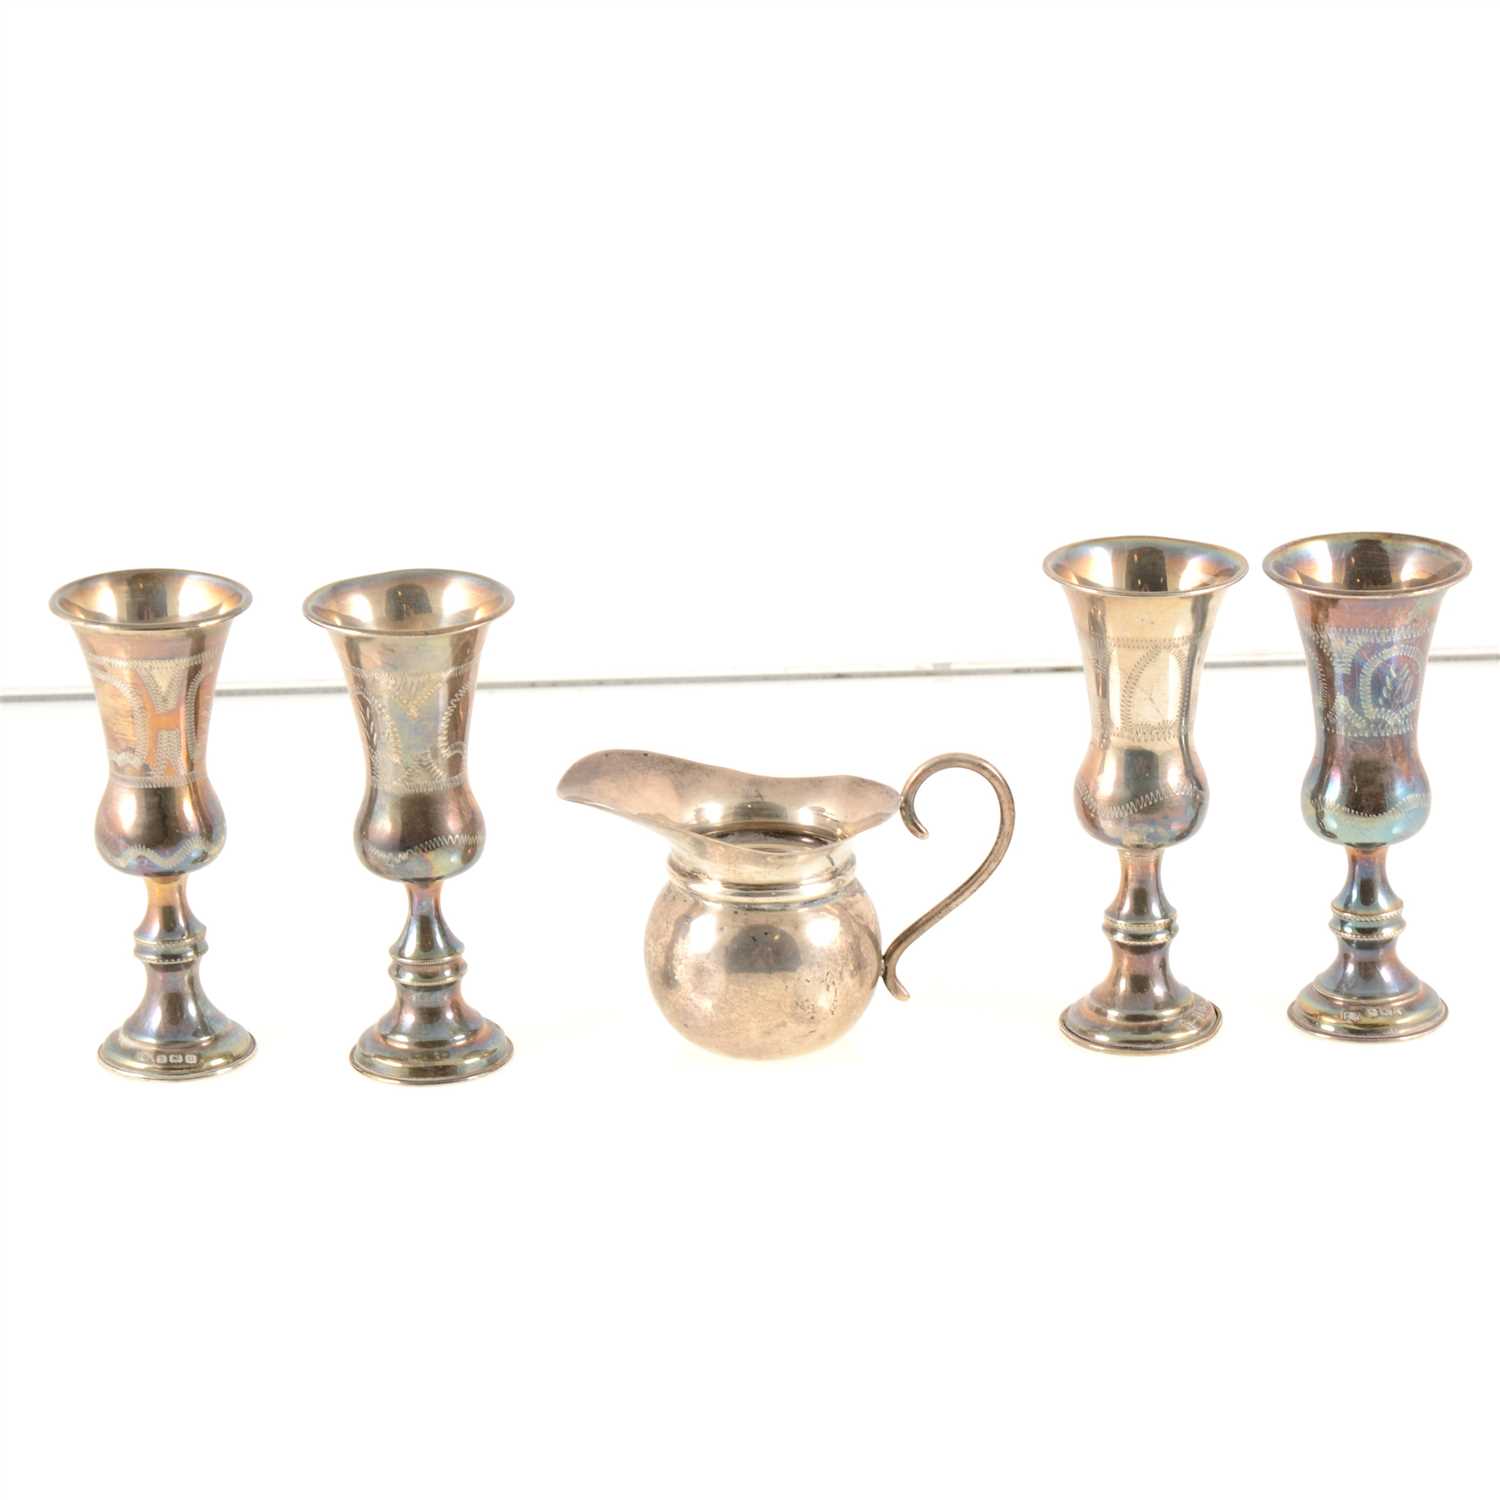 Lot 189 - Set of eight silver Kiddush cups, maker's mark J.R., Birmingham, circa 1920, 10cm, another very similar, each with slender bowls and engraved decoration, and a small Edwardian silver jug